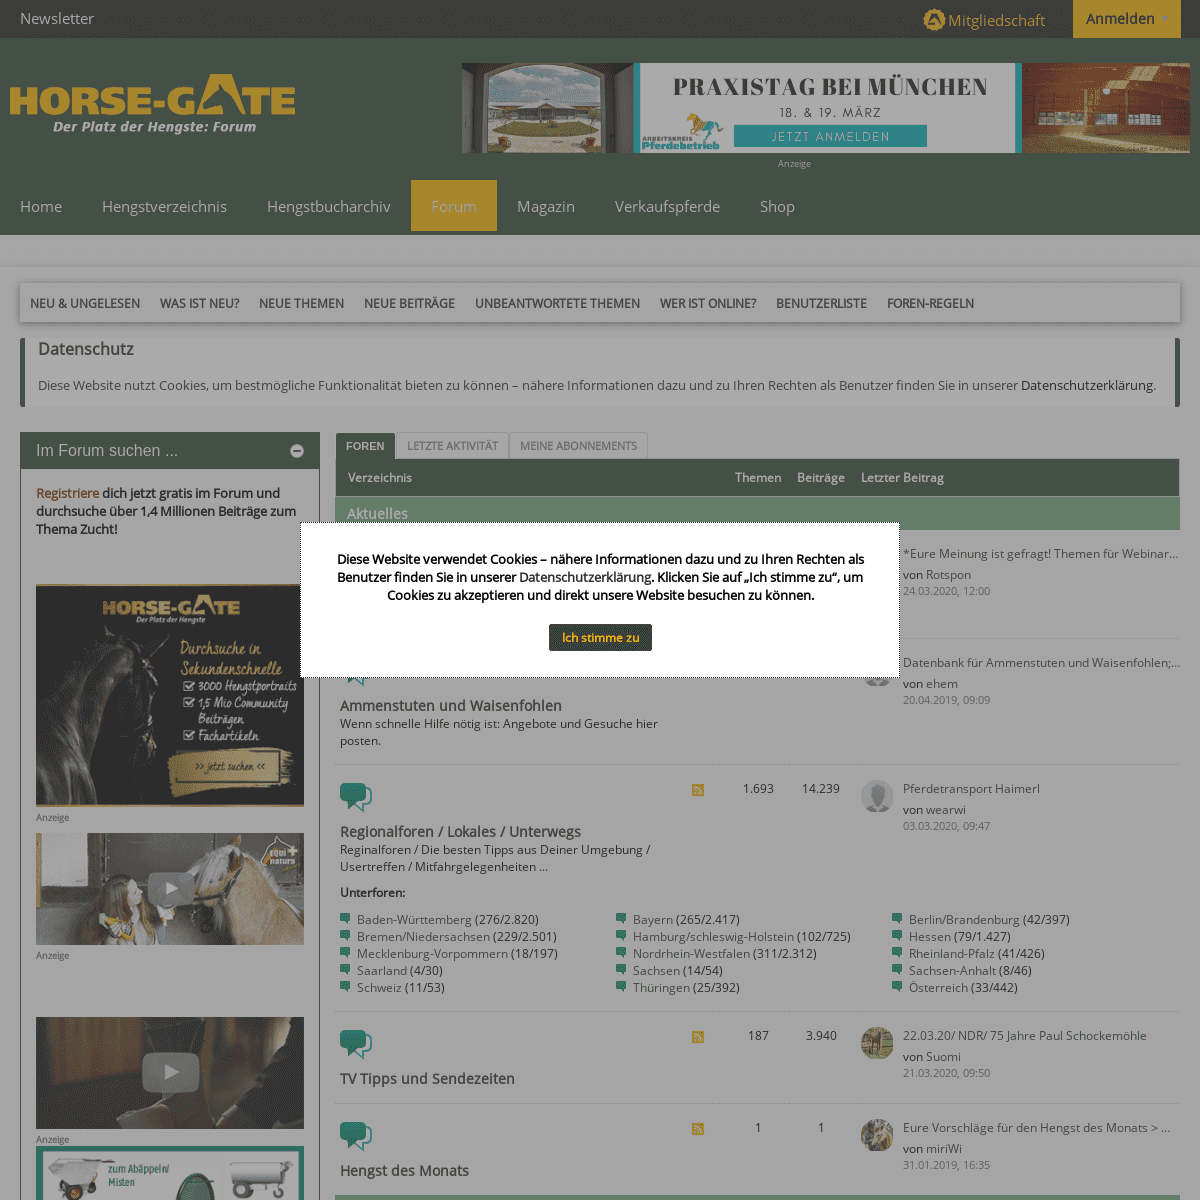 A complete backup of horse-gate-forum.com